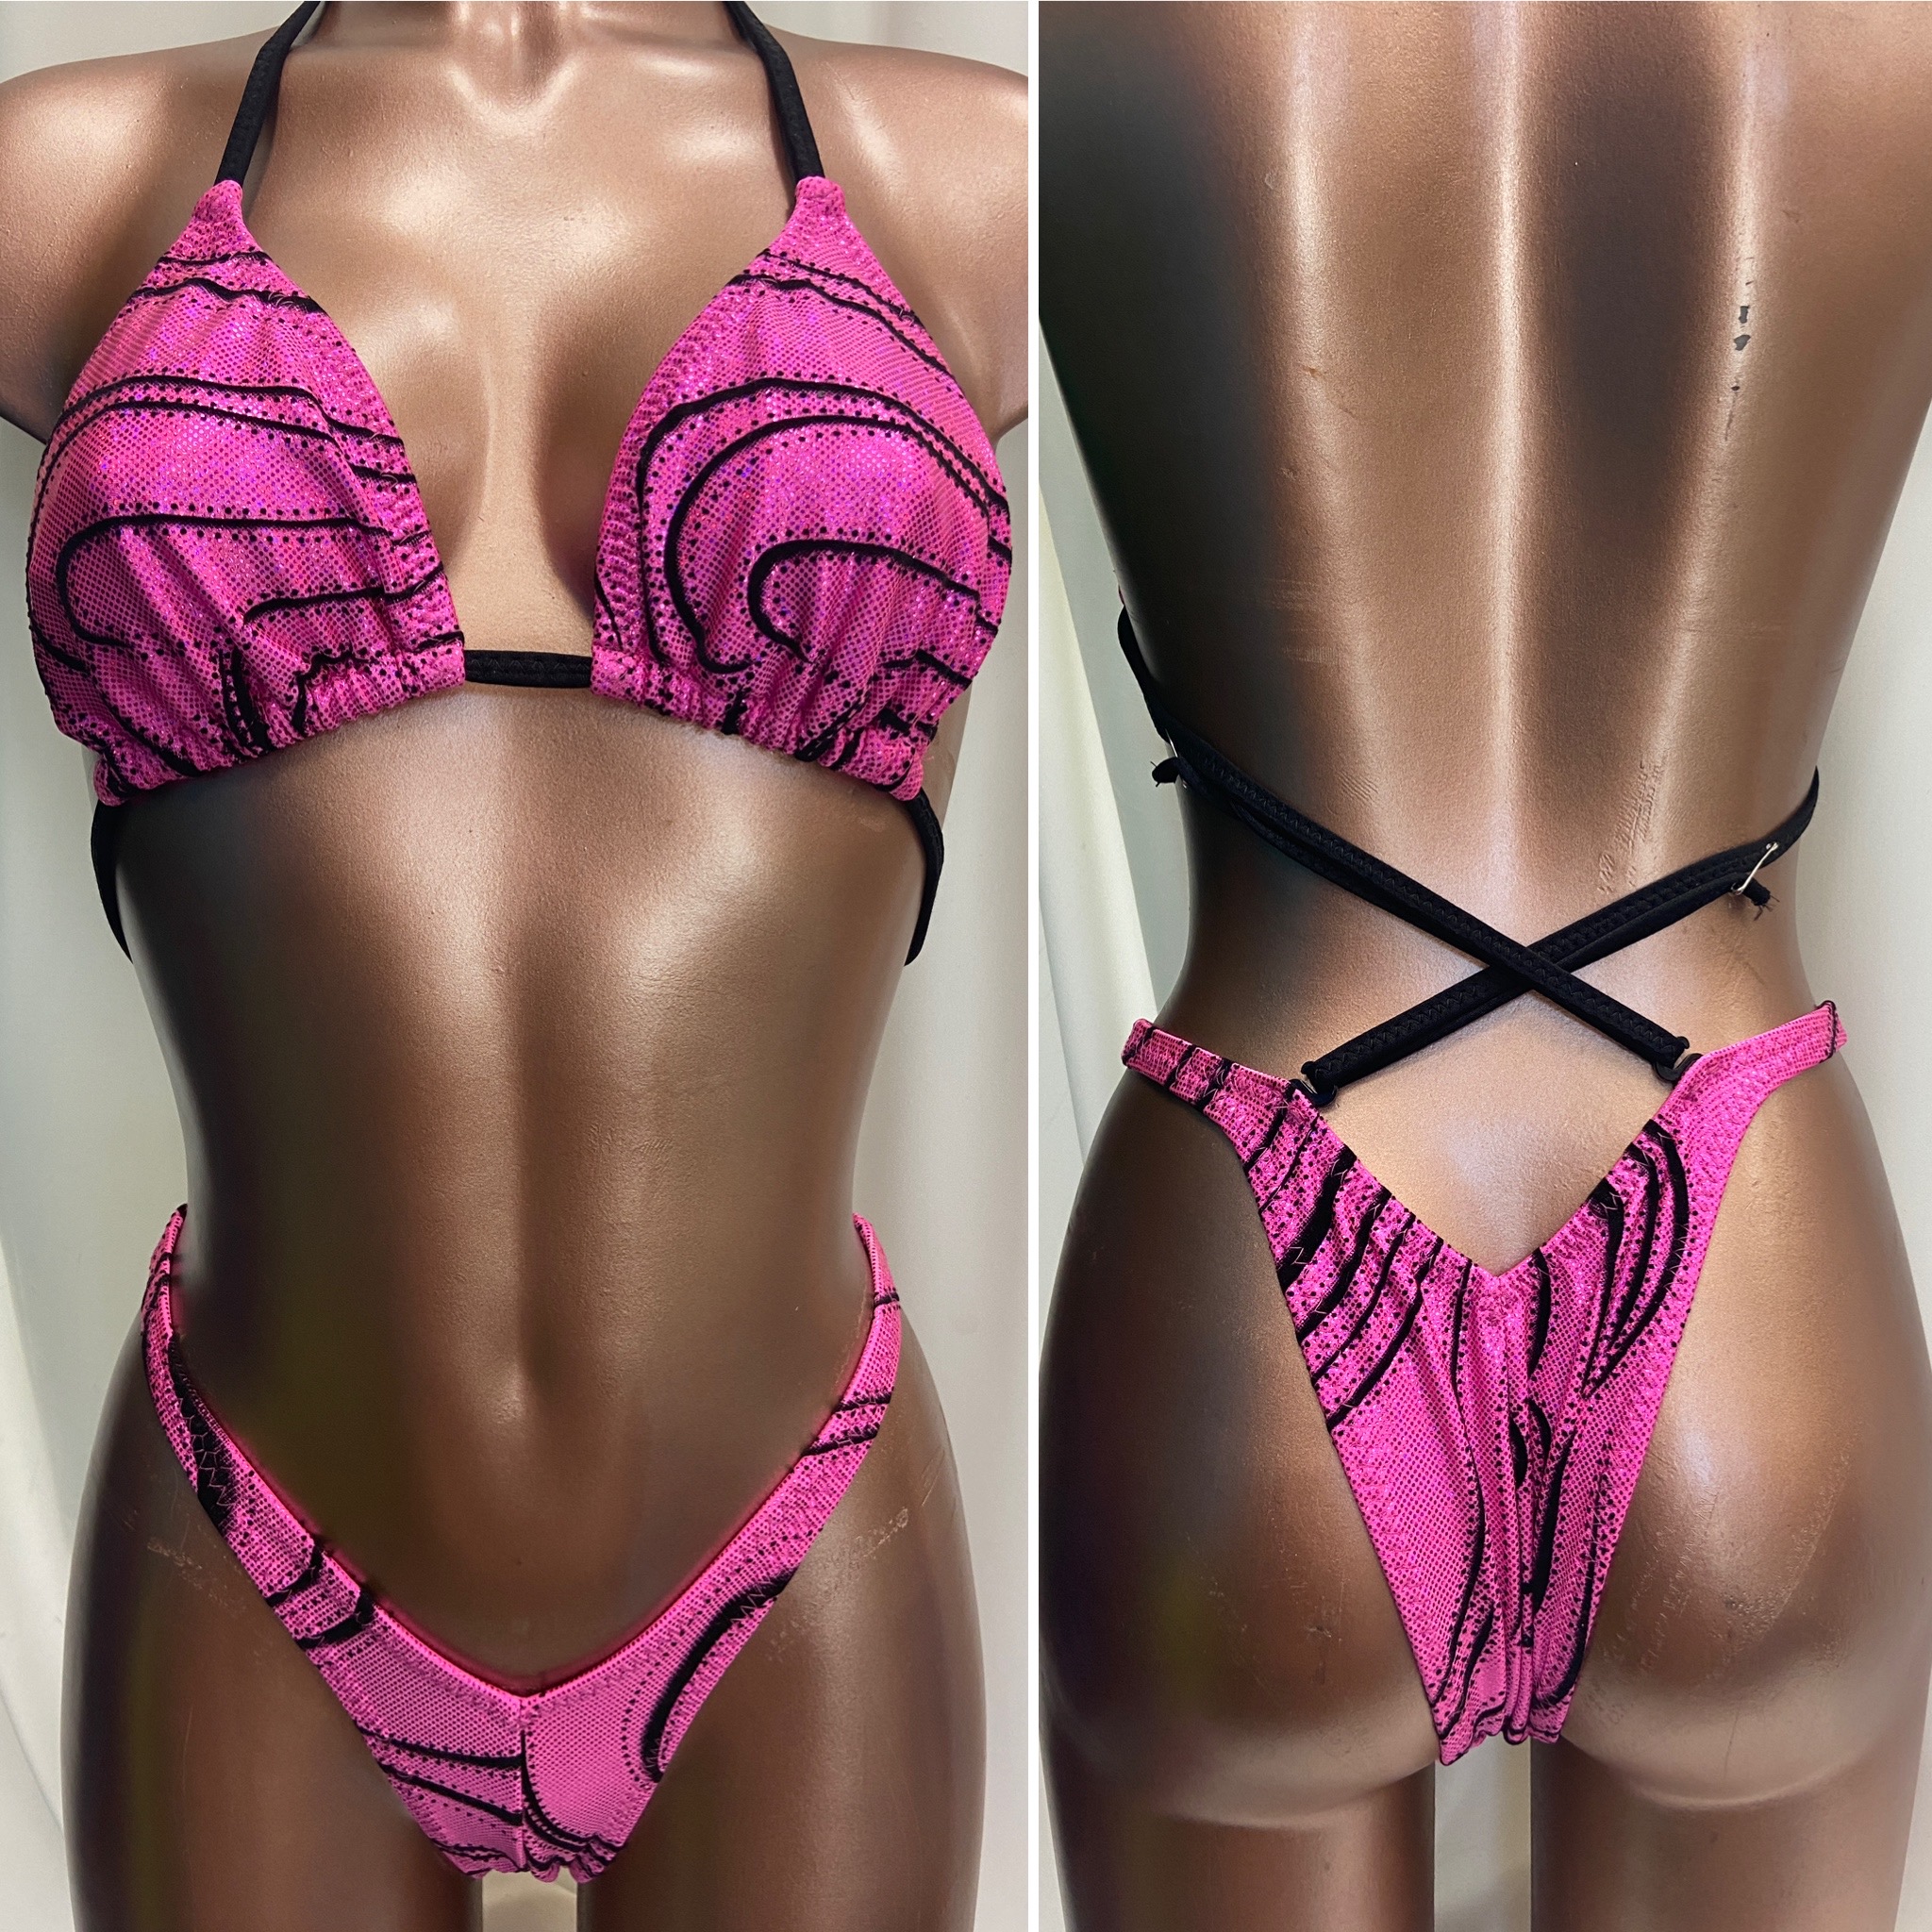 P6007
$65
B+ sliding top 
small front , xsmall back
pink with embossed black design